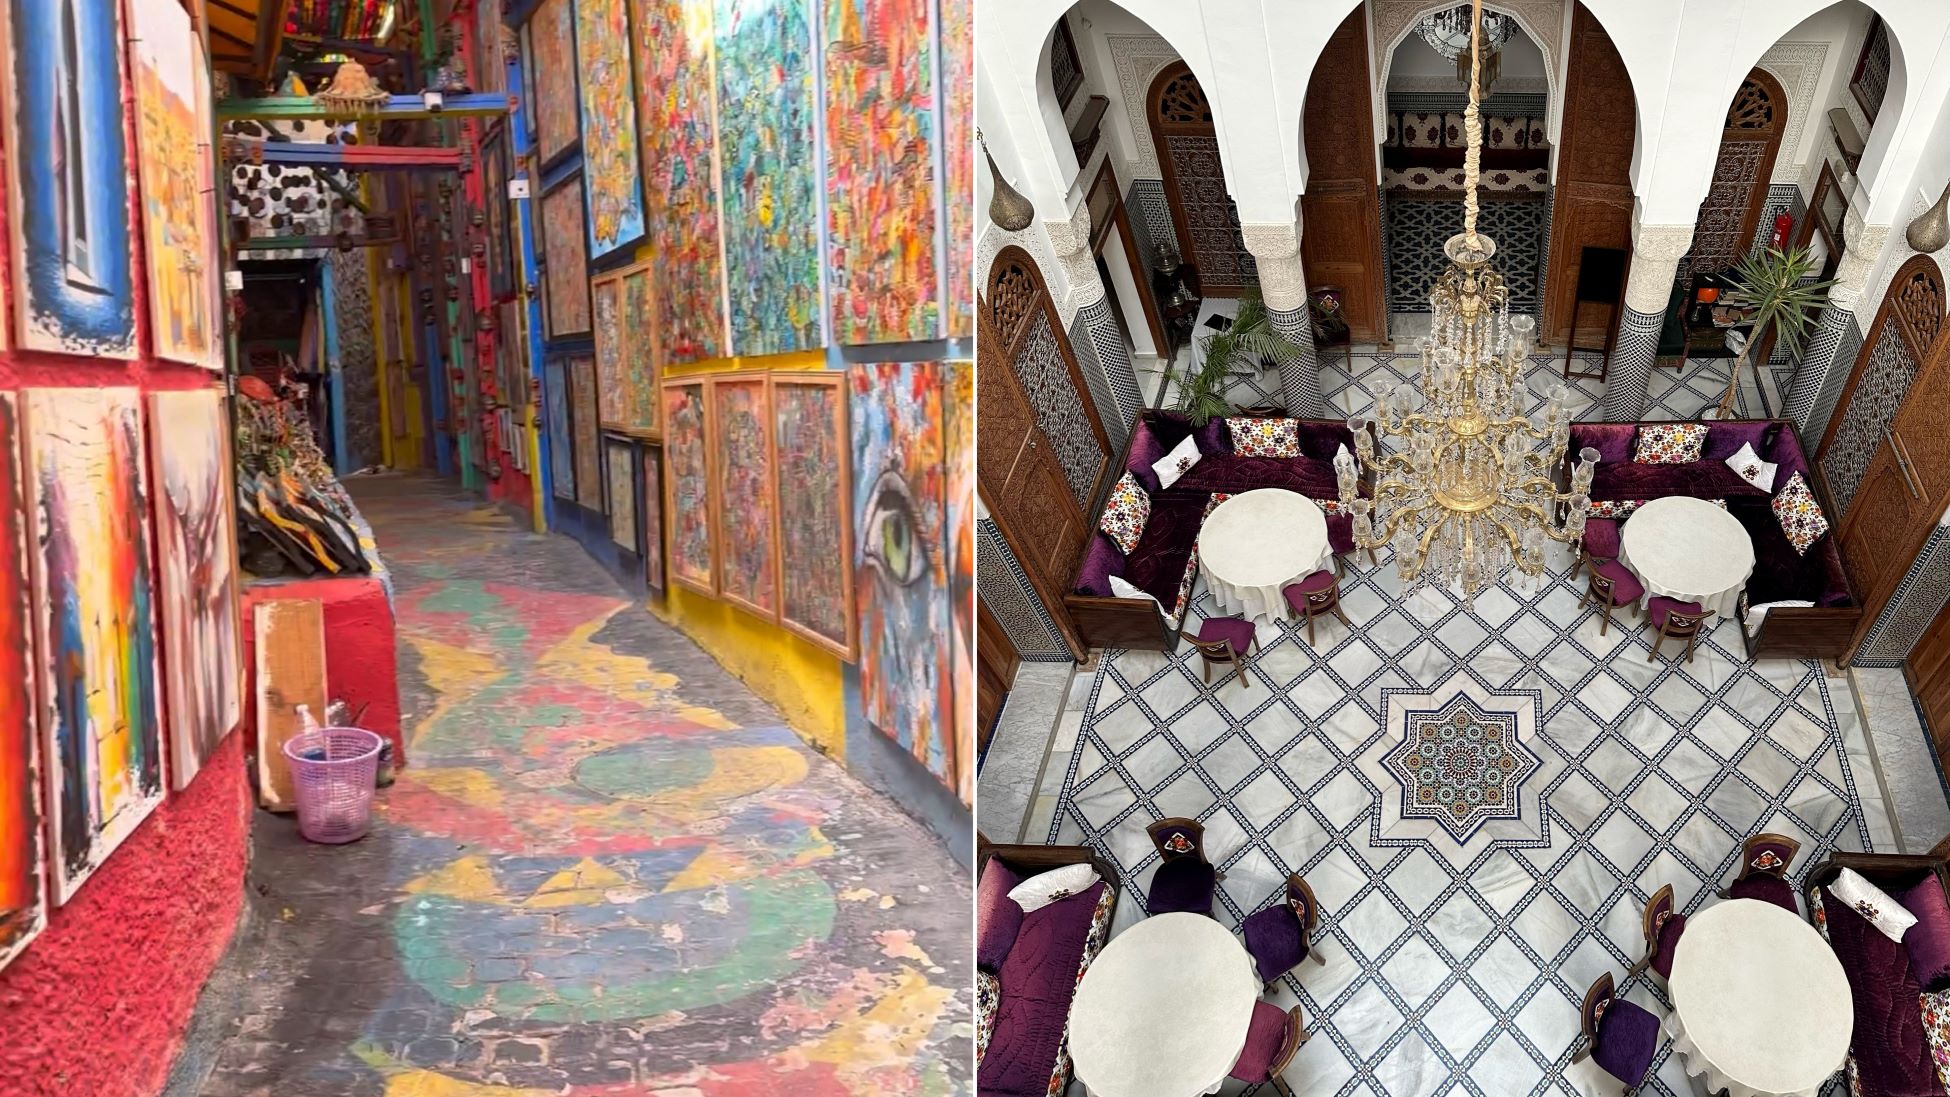 An image split into two. On the left is an art walk and on the right is a birdeye view of a Riad.